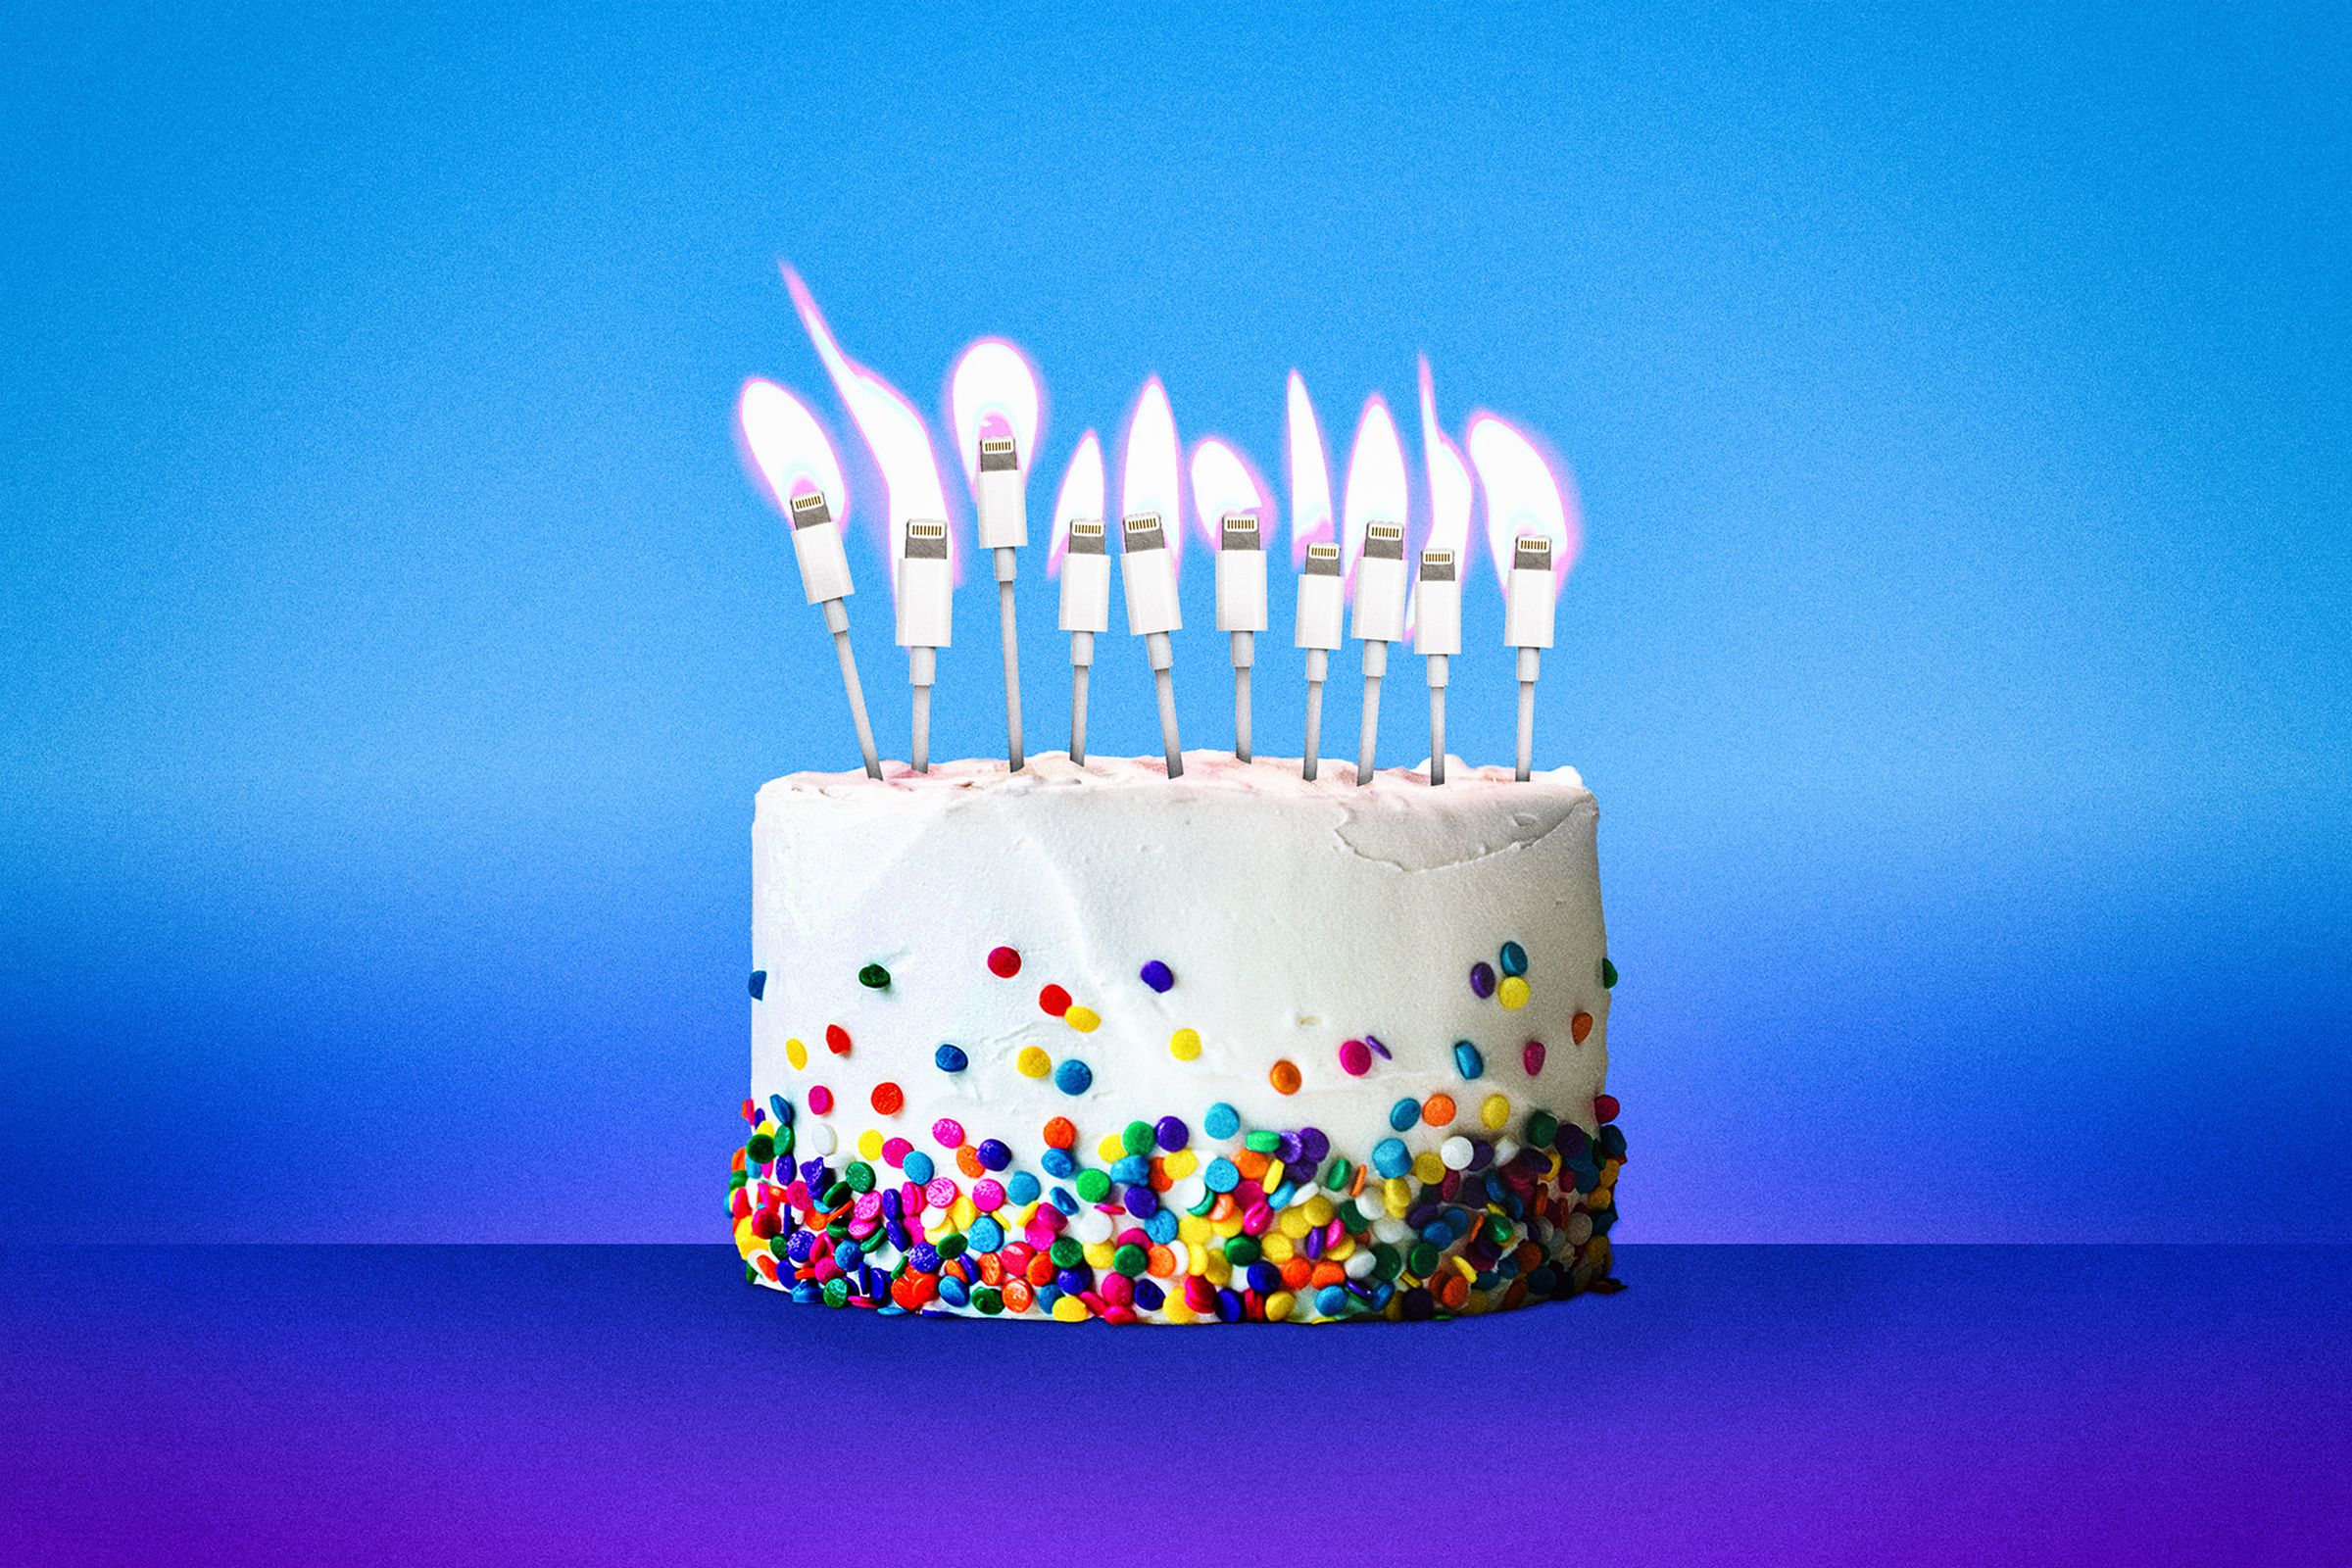 A birthday cake with 10 lit candles, which are actually Lightning connectors